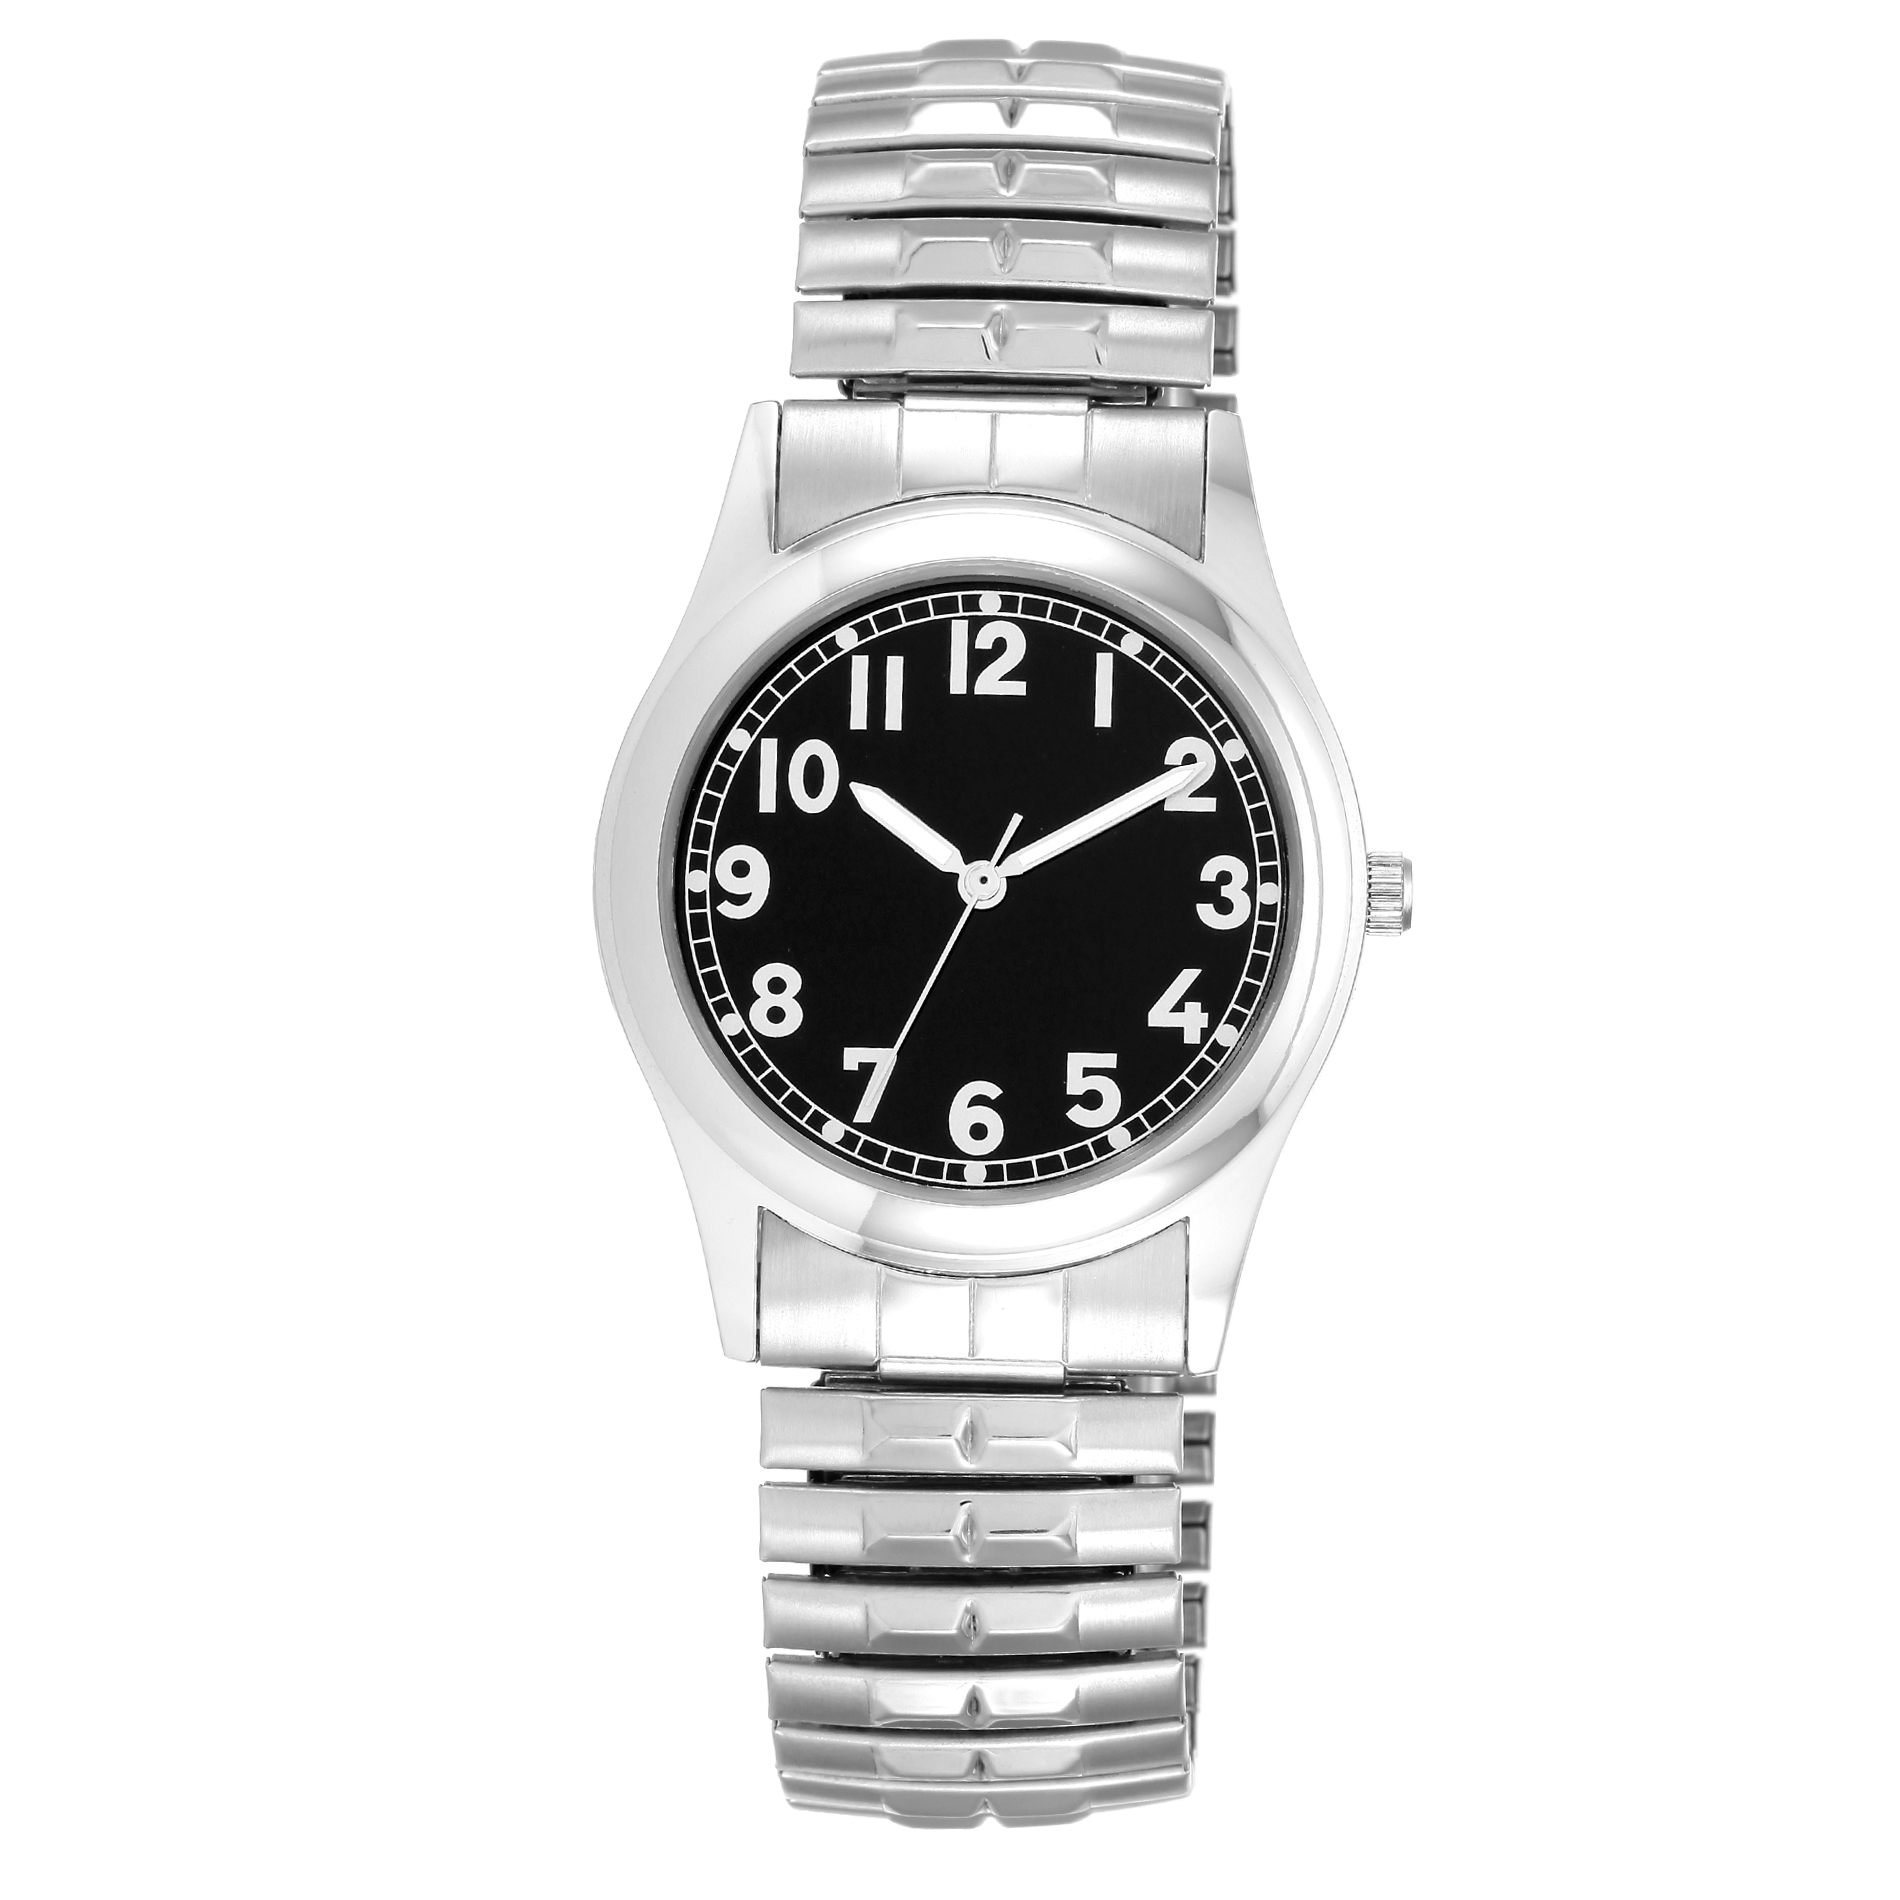 Silver Tone Analog Expansion Watch